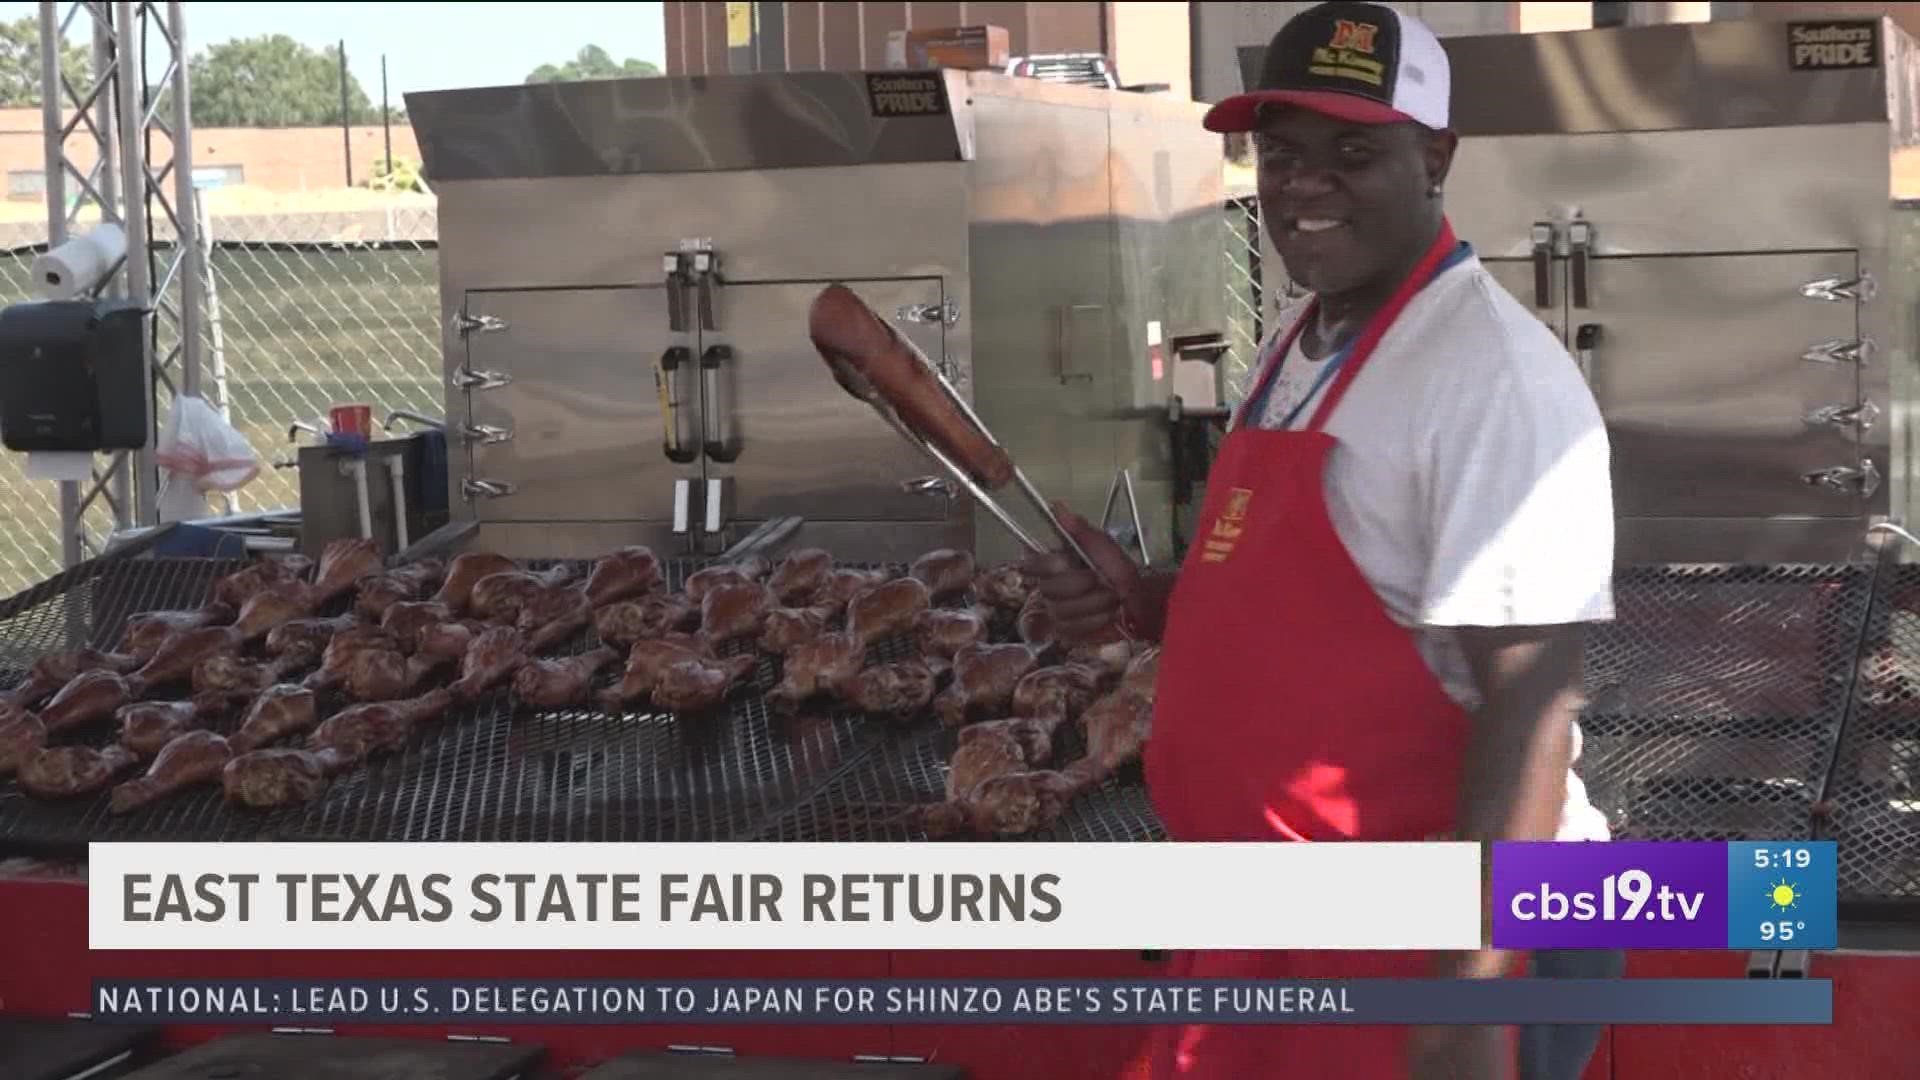 This is the 106th year for the East Texas State Fair